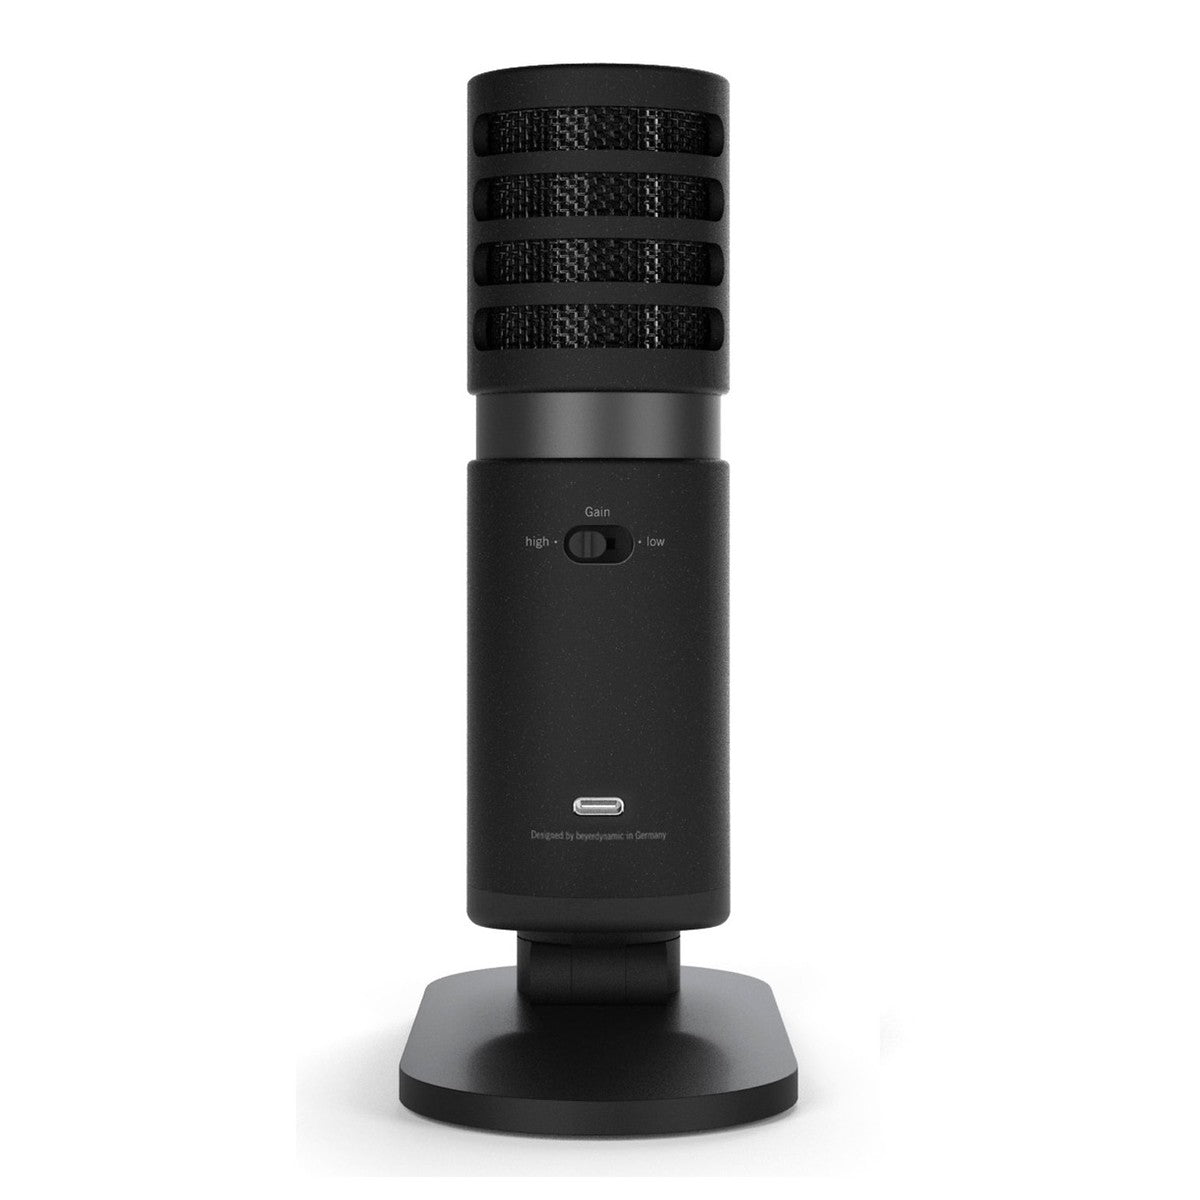 Beyerdynamic Fox USB Condenser Microphone, ideal for podcasting, broadcasting, music rooms and studios